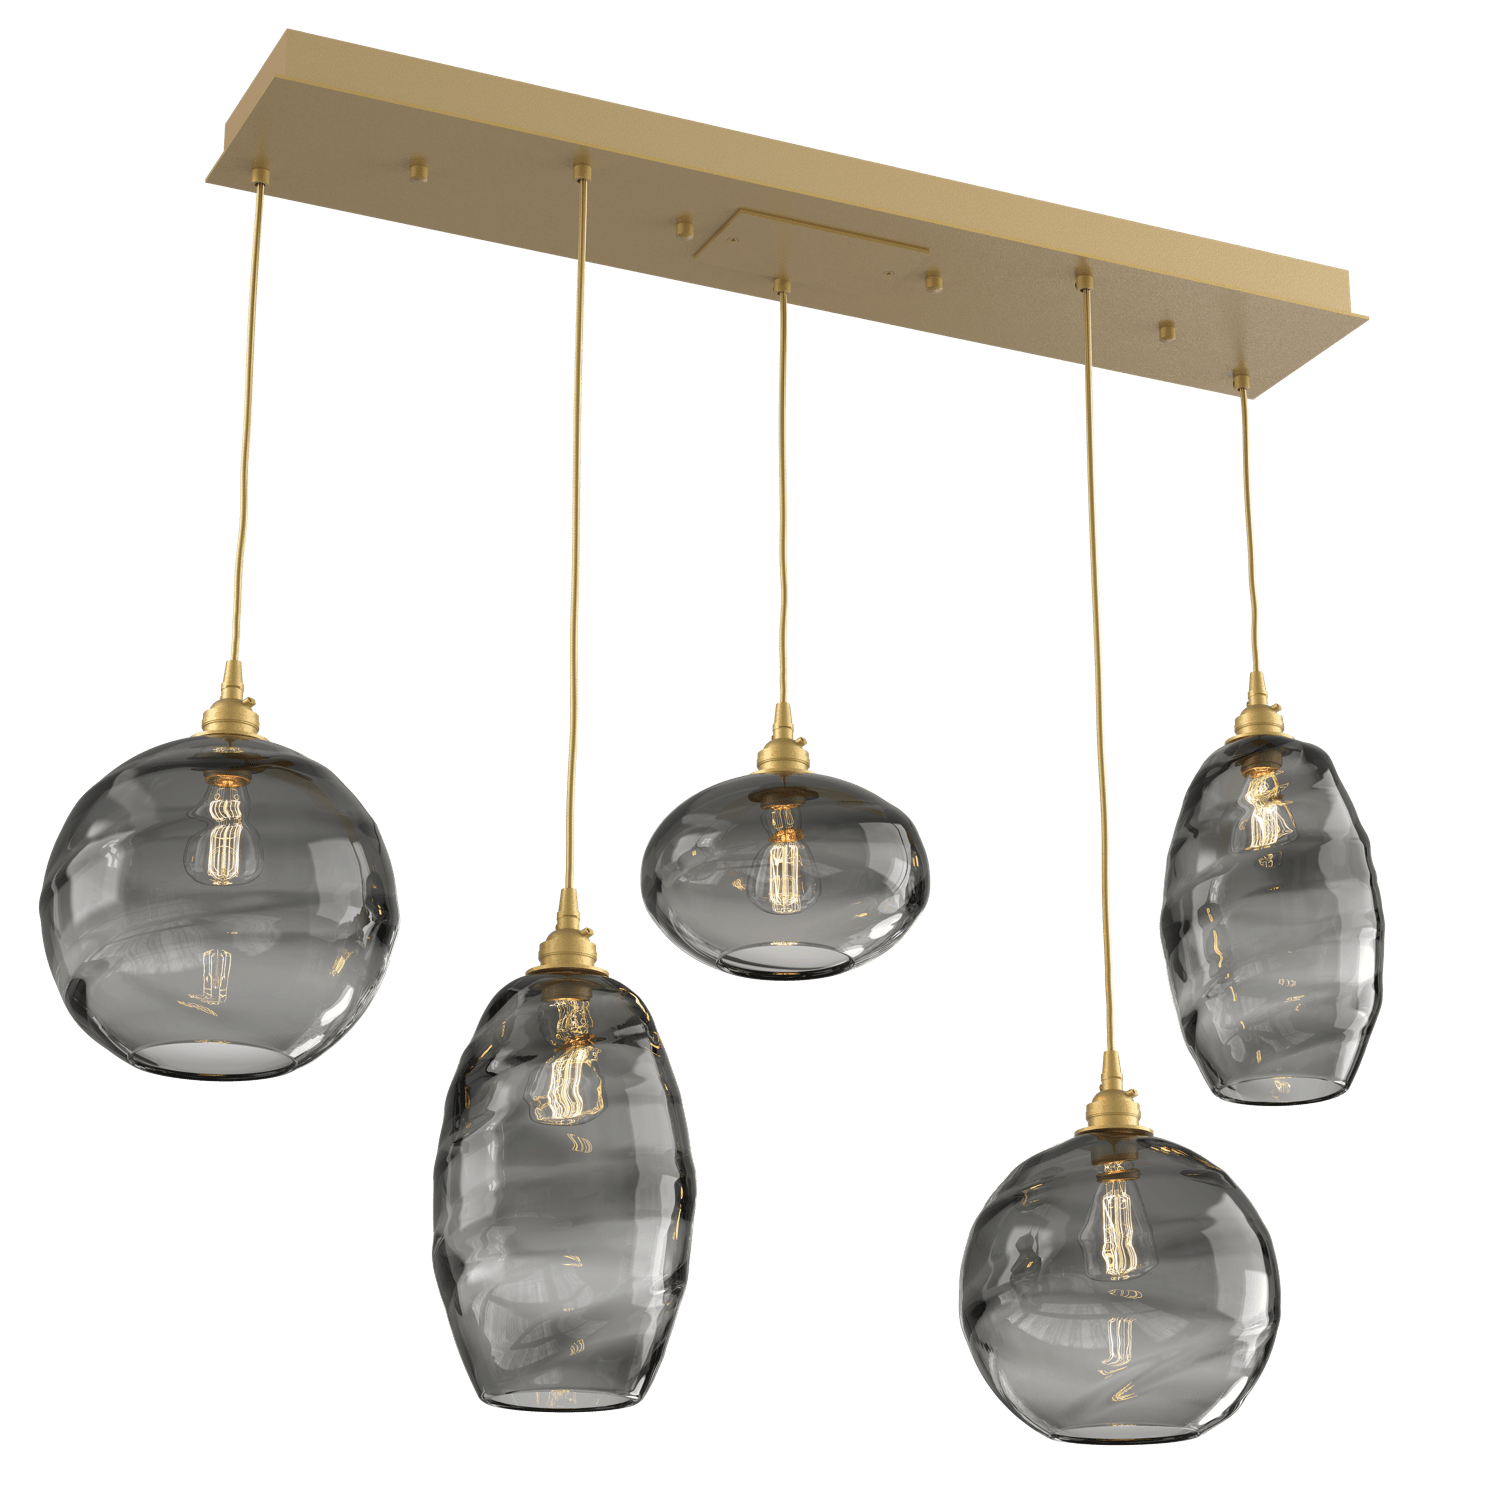 PLB0048-05-GB-OS-Hammerton-Studio-Optic-Blown-Glass-Misto-5-light-linear-pendant-chandelier-with-gilded-brass-finish-and-optic-smoke-blown-glass-shades-and-incandescent-lamping